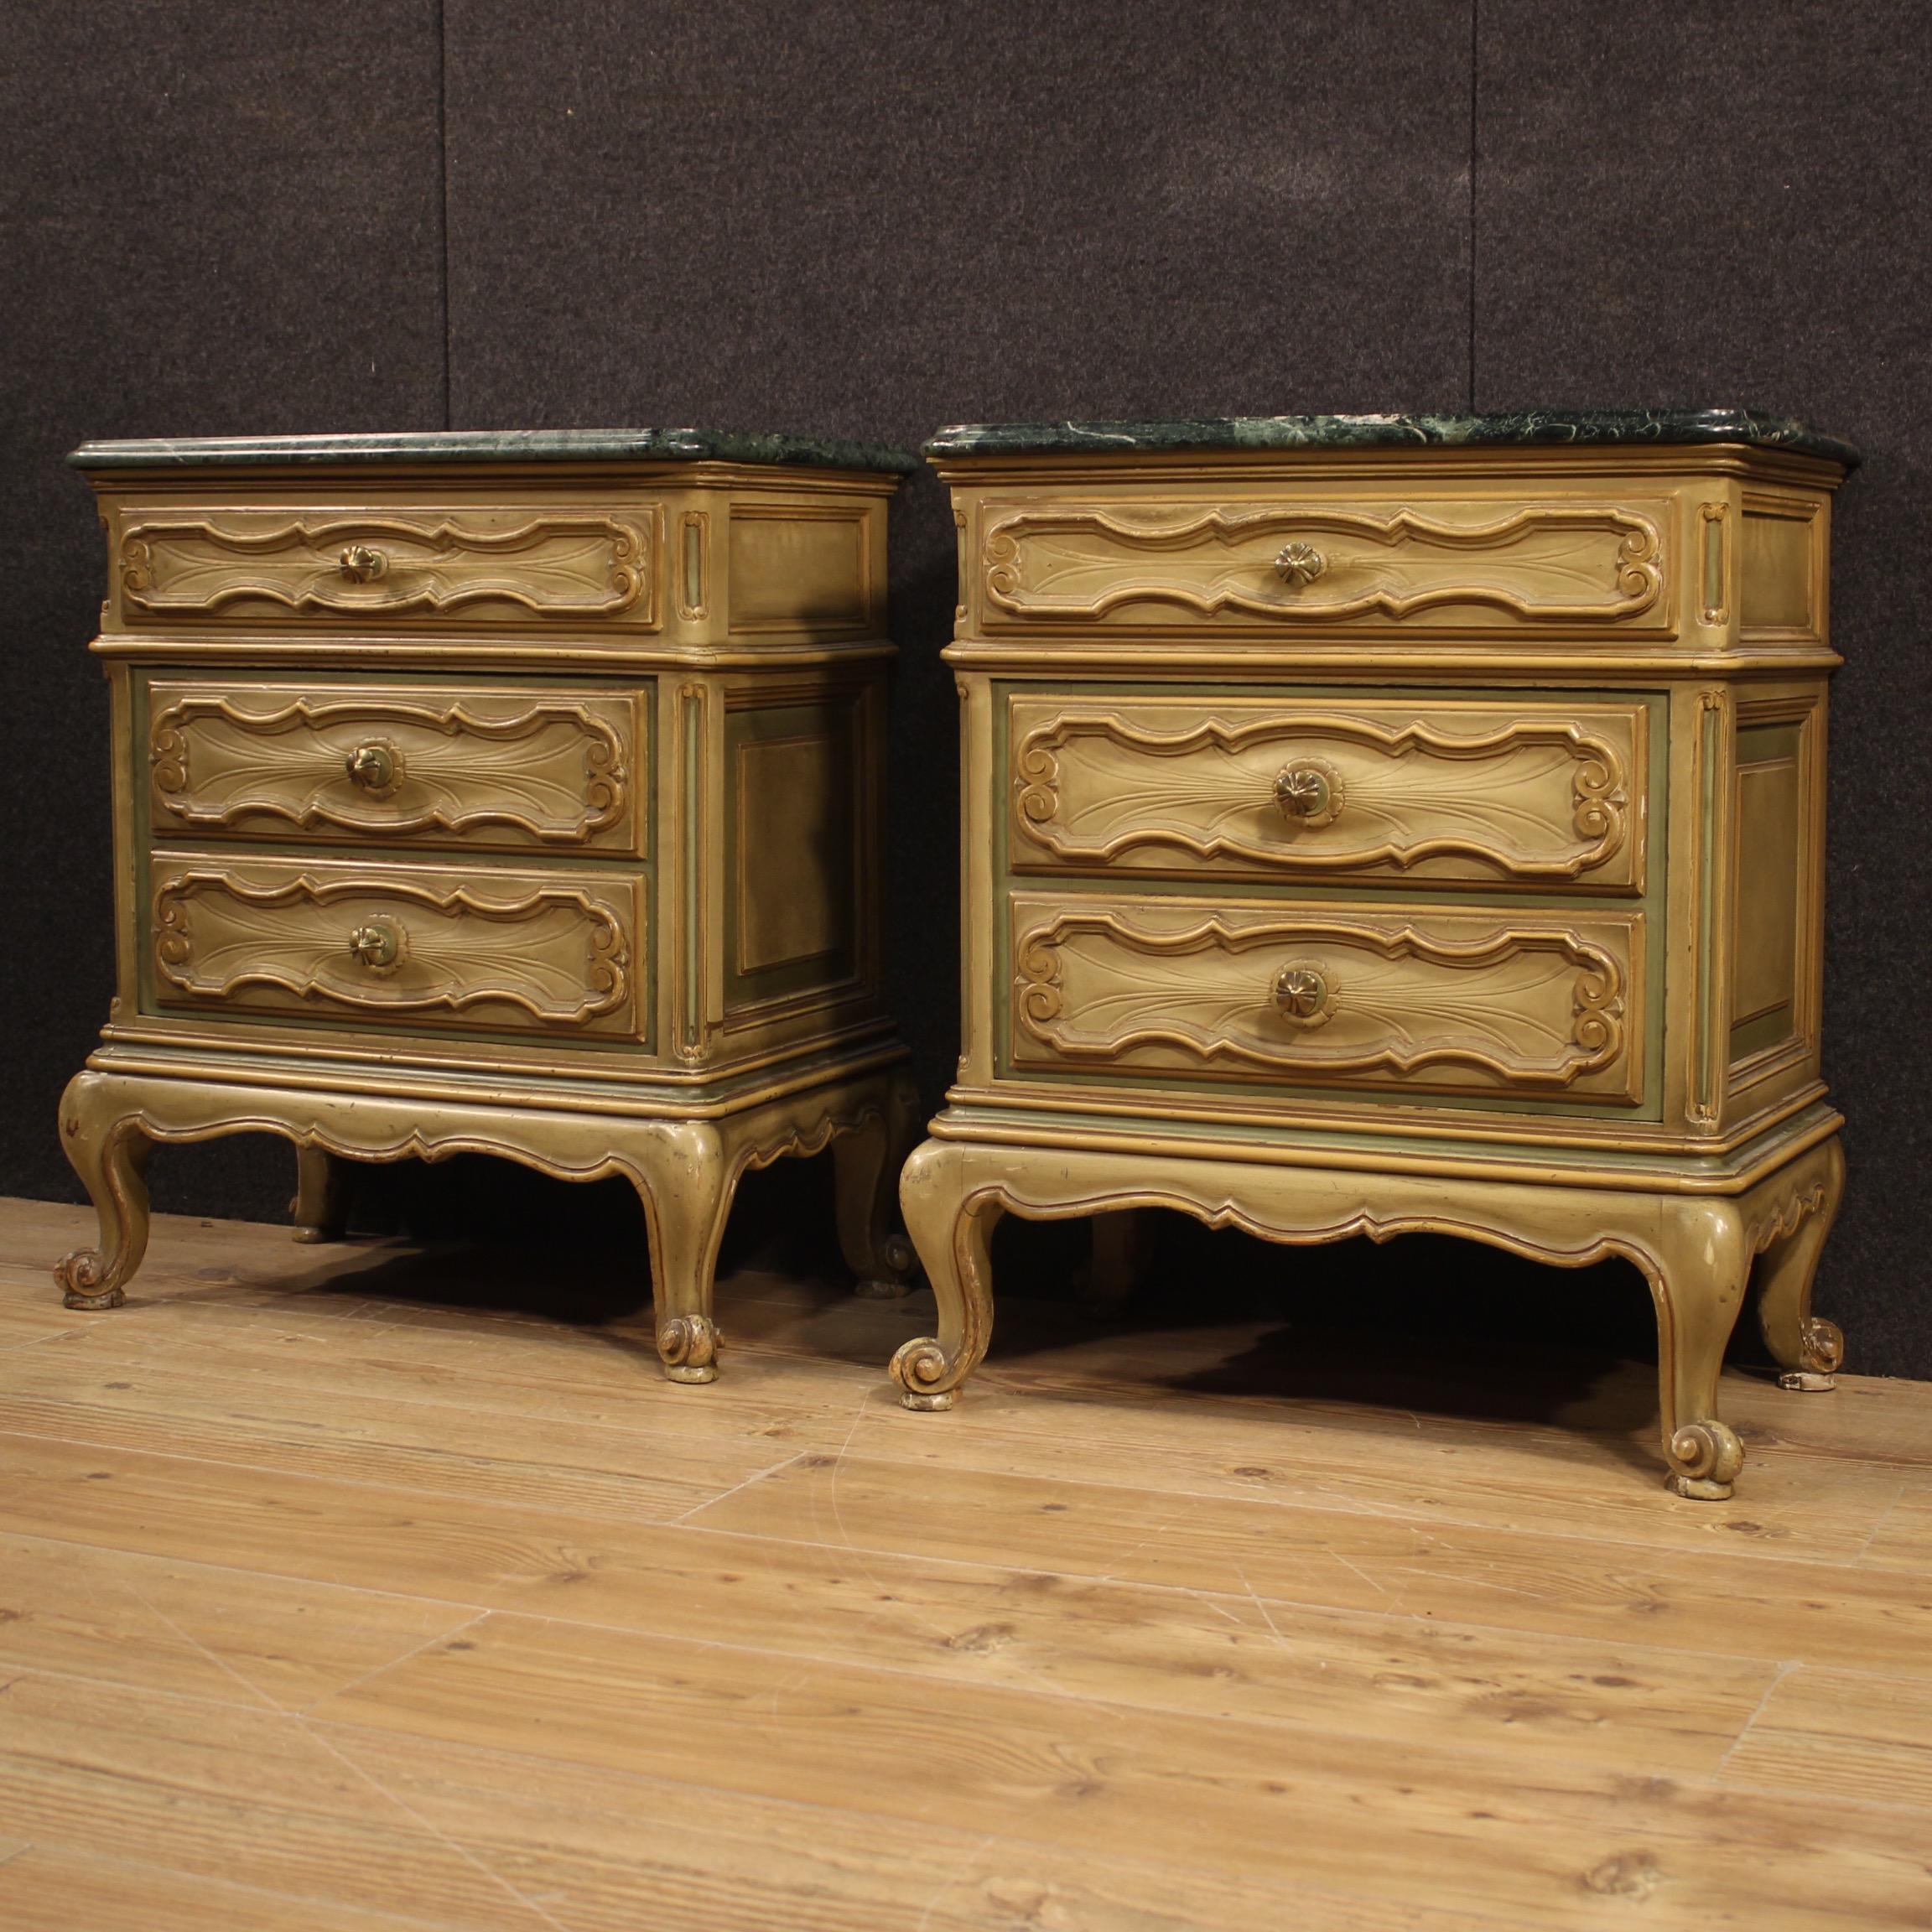 Pair of Italian bedside tables from the 20th century. Carved and lacquered wooden furniture in Baroque style of beautiful lines and pleasant decor. Bedside tables with original marble top of beautiful size and service. A marble has undergone a